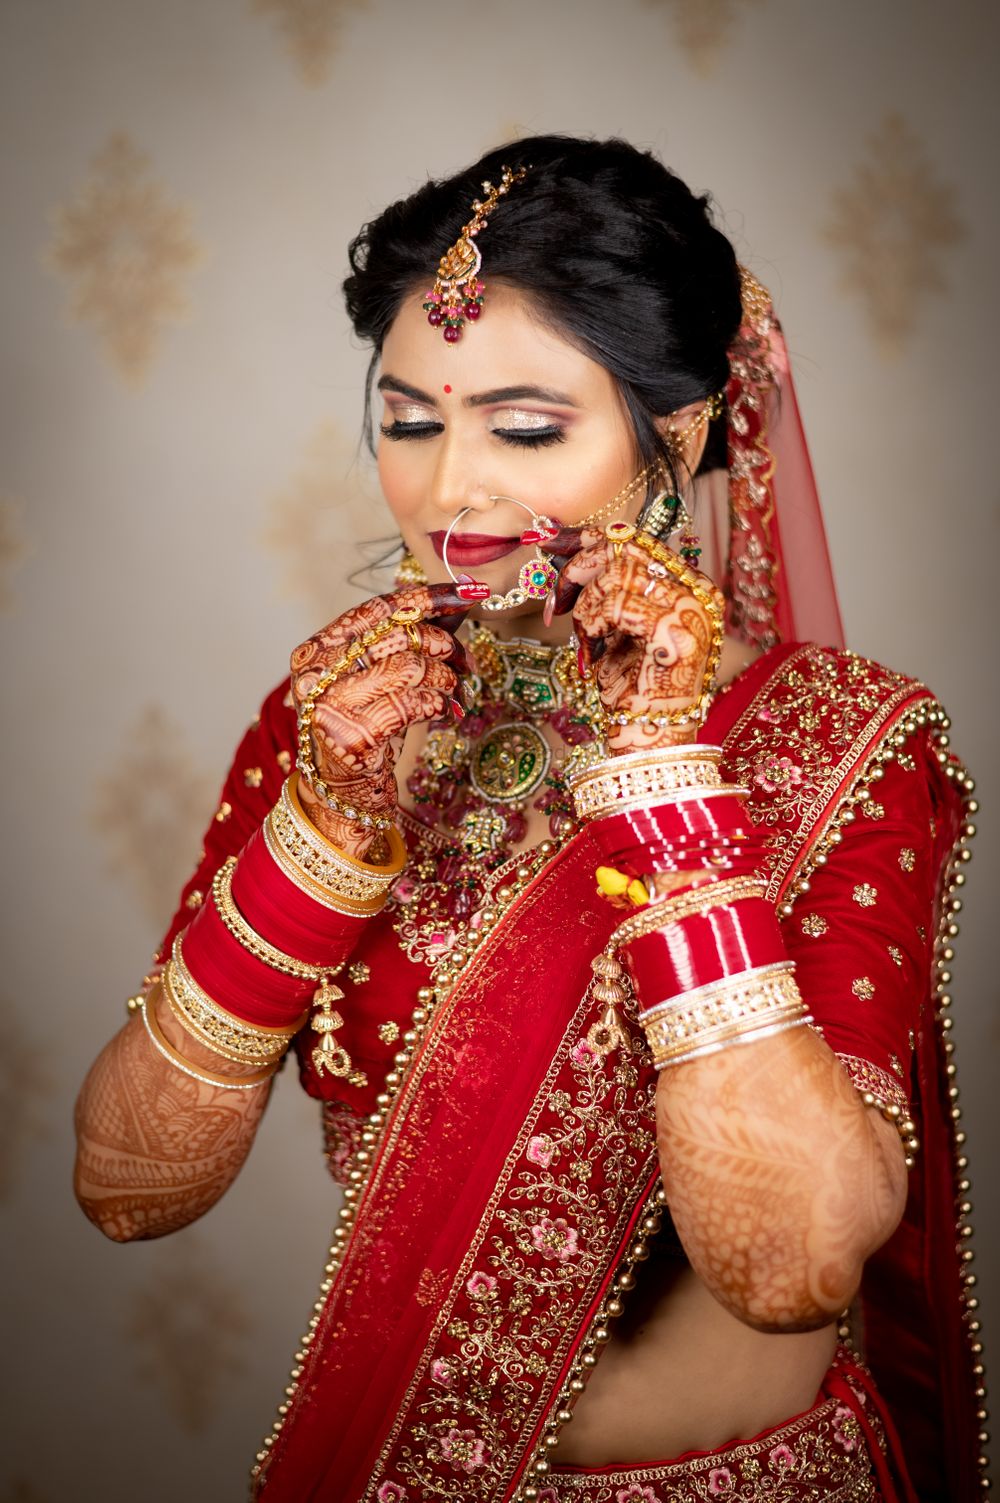 Photo From MAKEUP BY SENIOR ARTIST  - By Bridal Makeup by Bhaavya Kapur